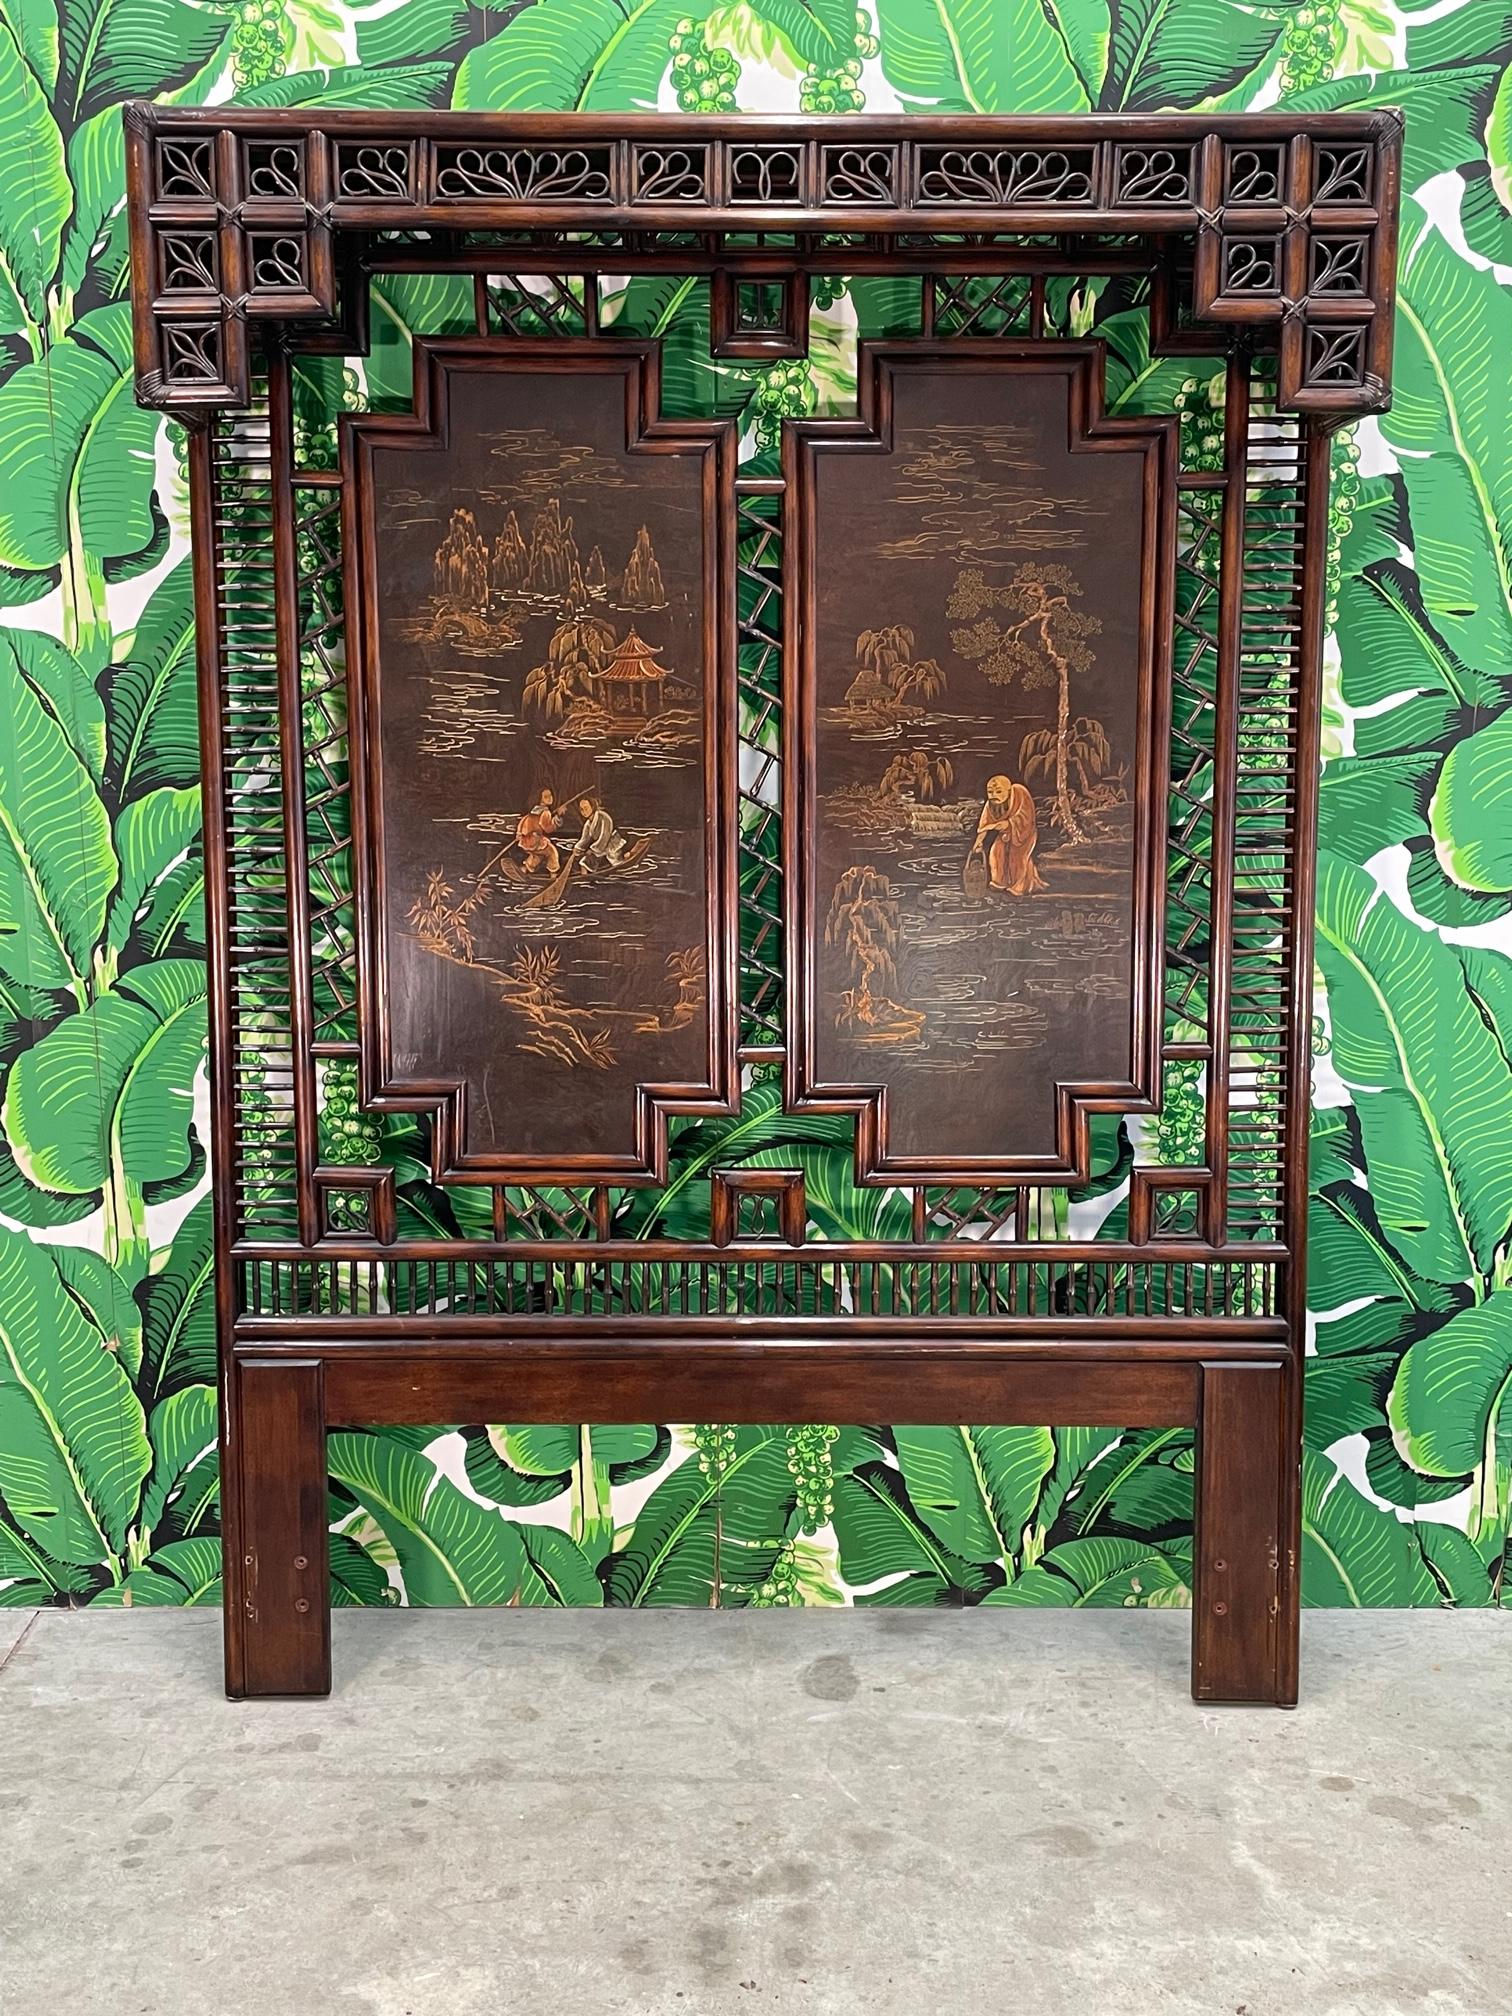 Large canopy headboard by Henredon features rattan construction and Chinese artwork. Queen size. Good condition with minor imperfections consistent with age, see photos for condition details. 
For a shipping quote to your exact zip code, please